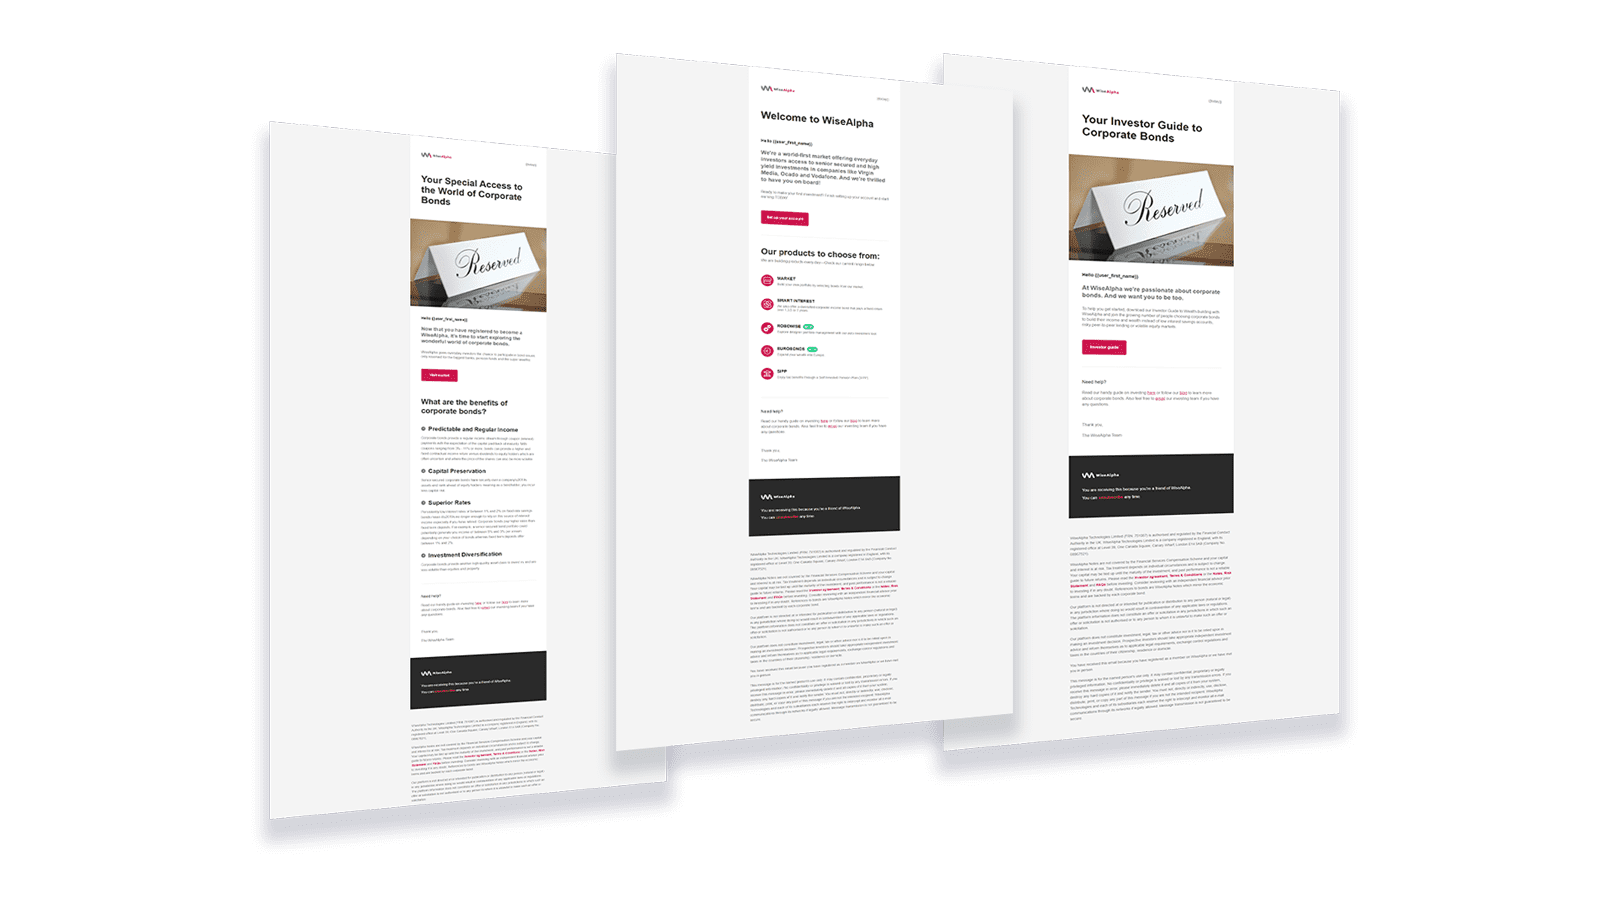 WiseAlpha email templates samples